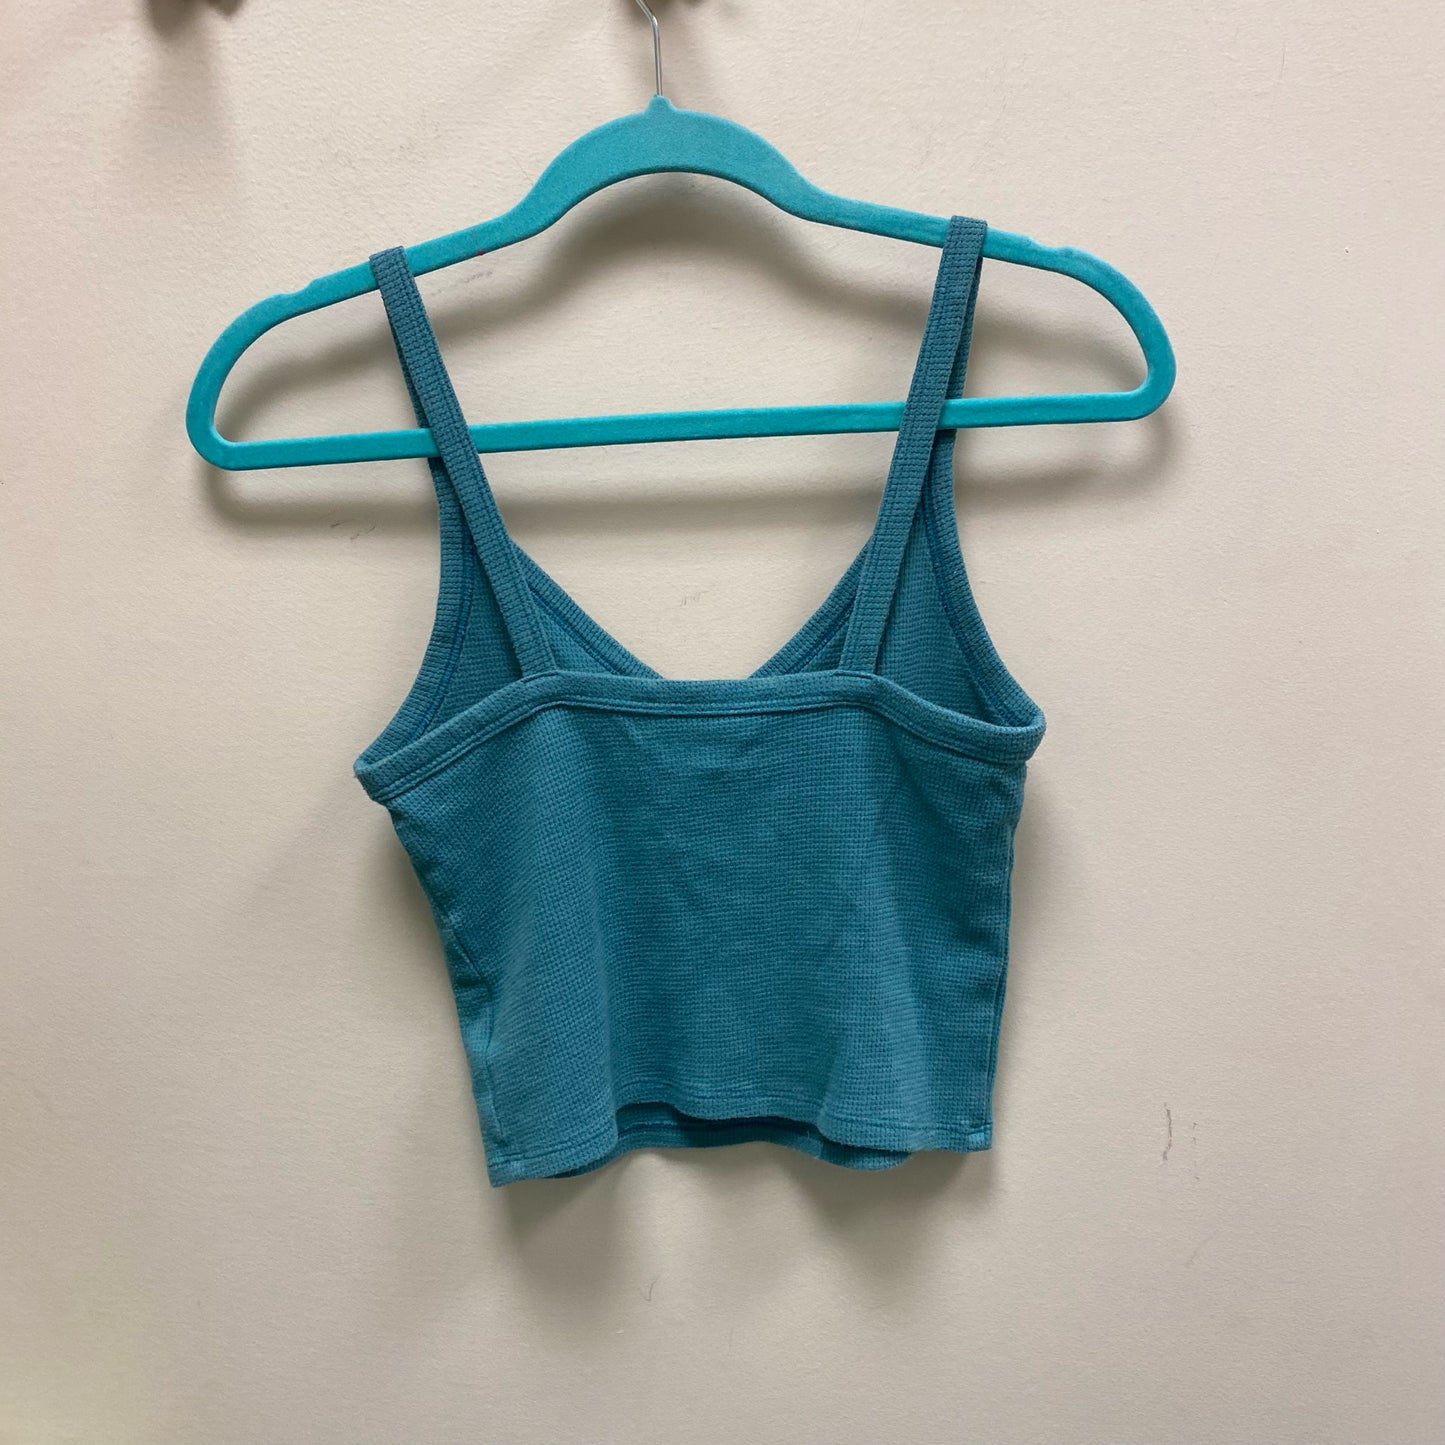 American Eagle Cropped Tank Top - Size Small